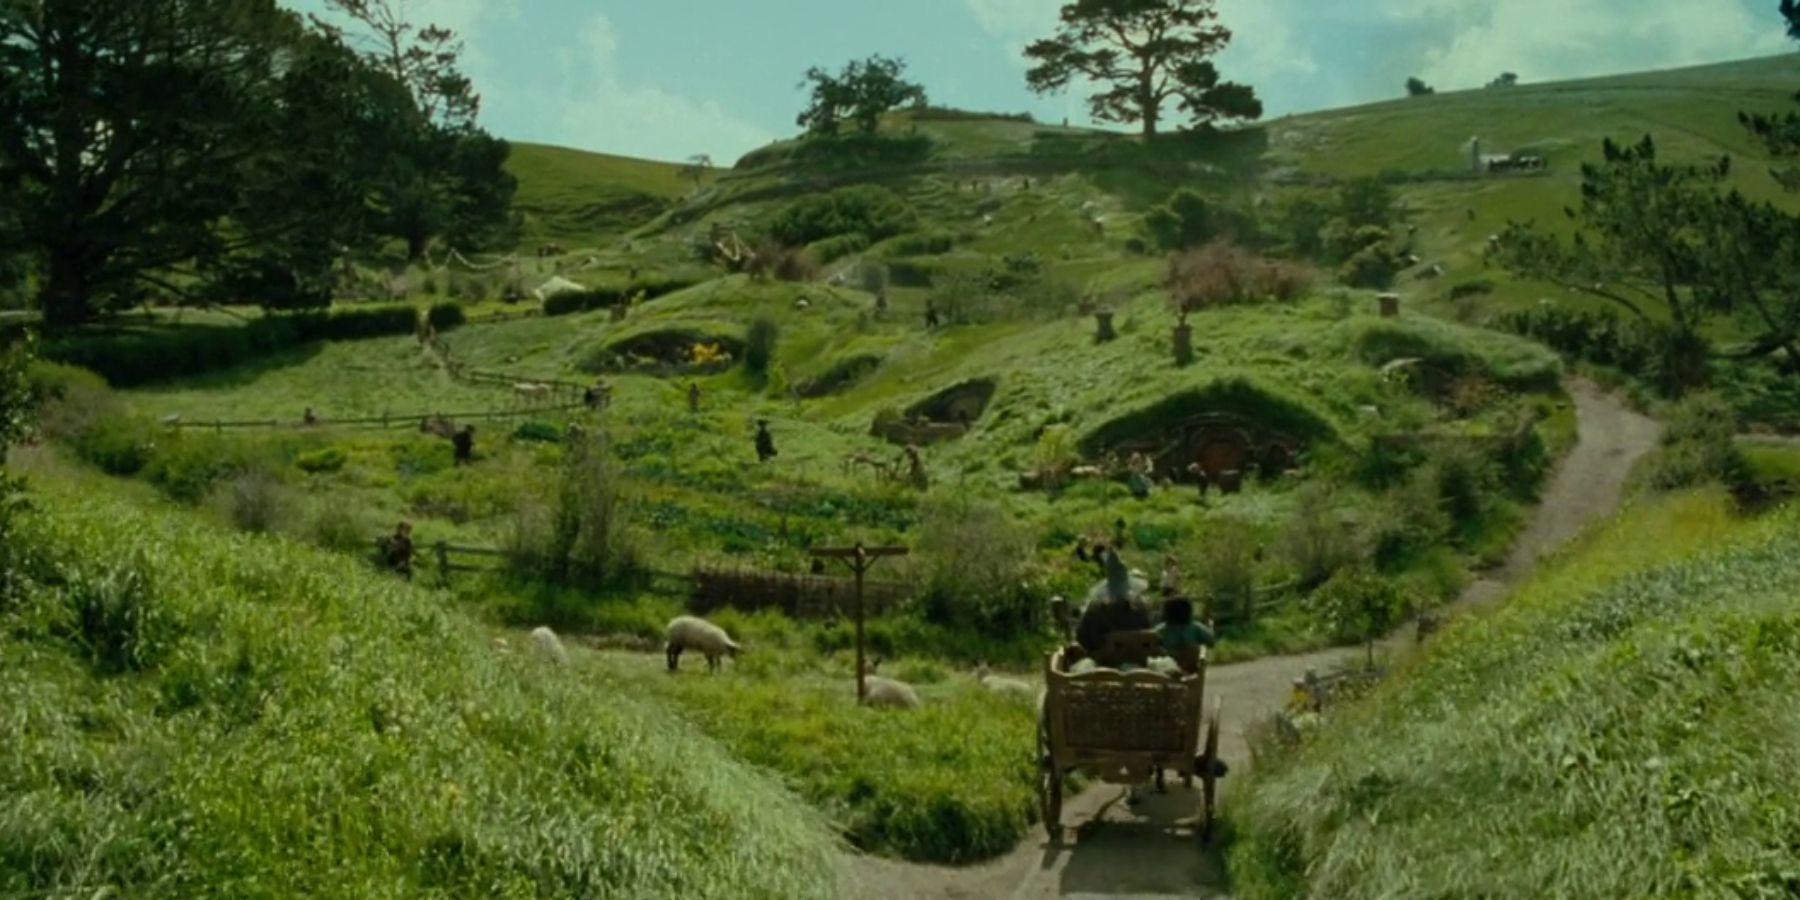 What Does The Life Of A Hobbit Look Like When They Aren't Saving The World?